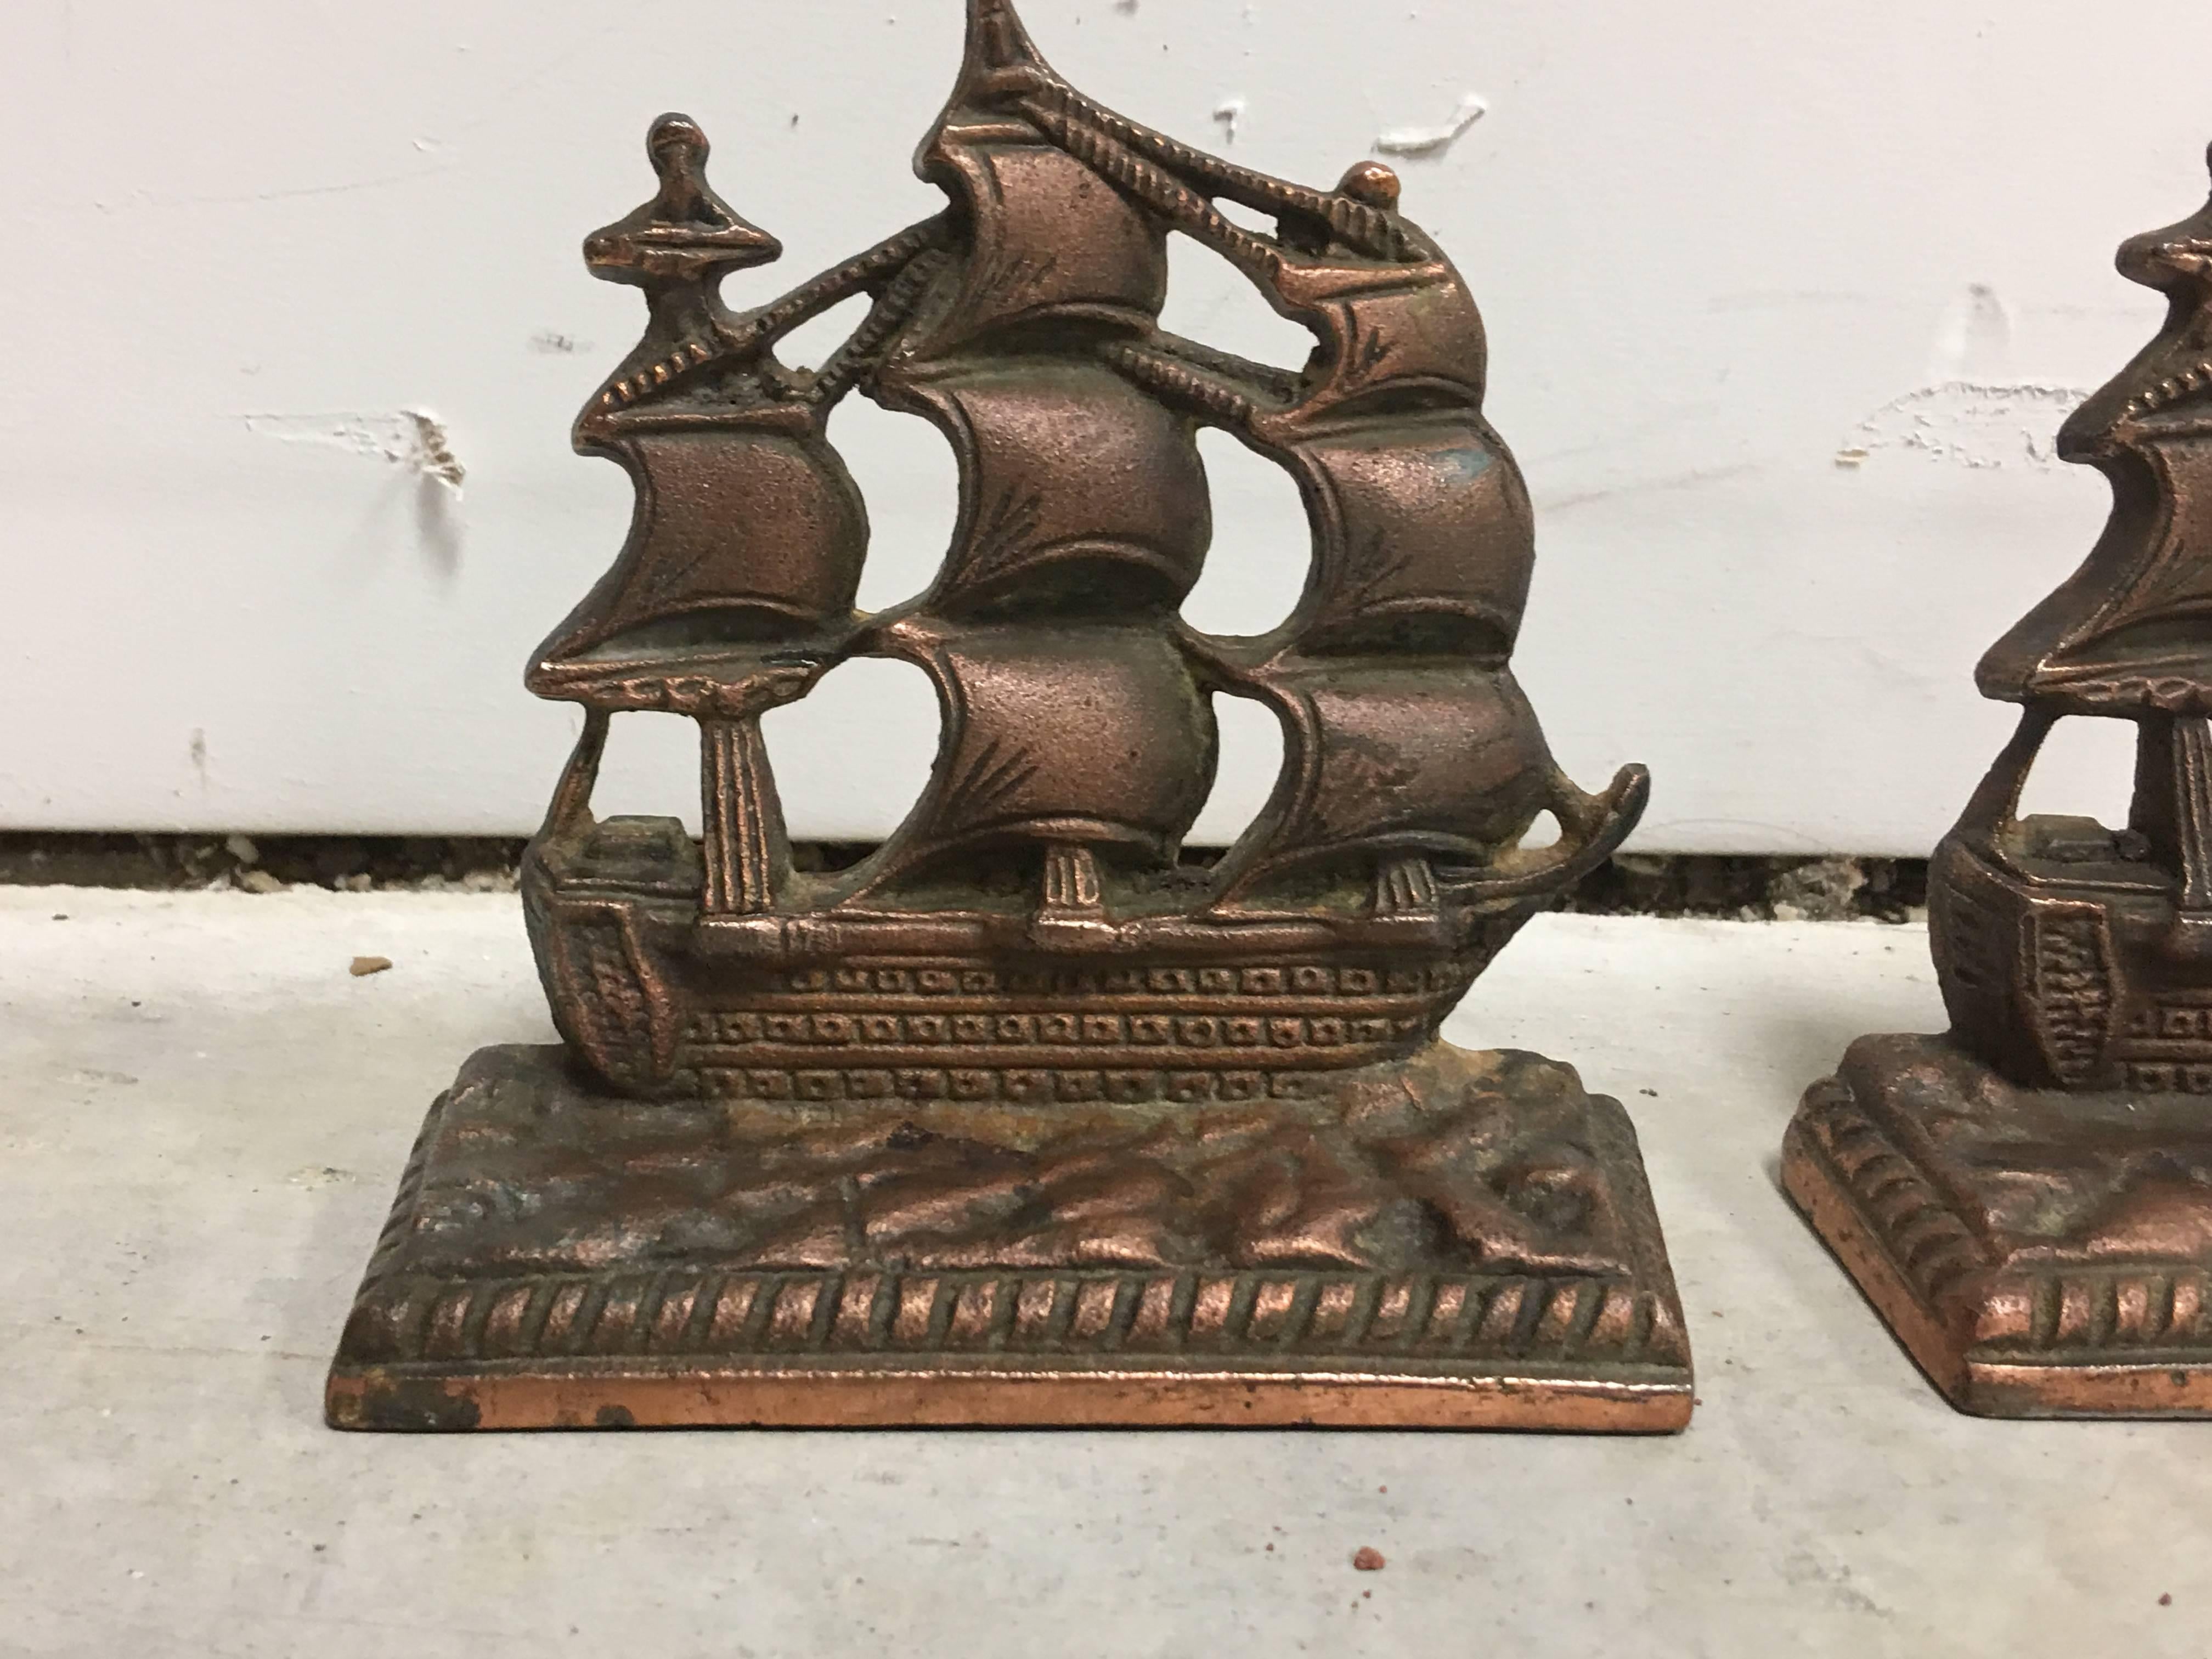 Offered is a beautiful and handsome, pair of 19th century cast-bronze ship bookends.